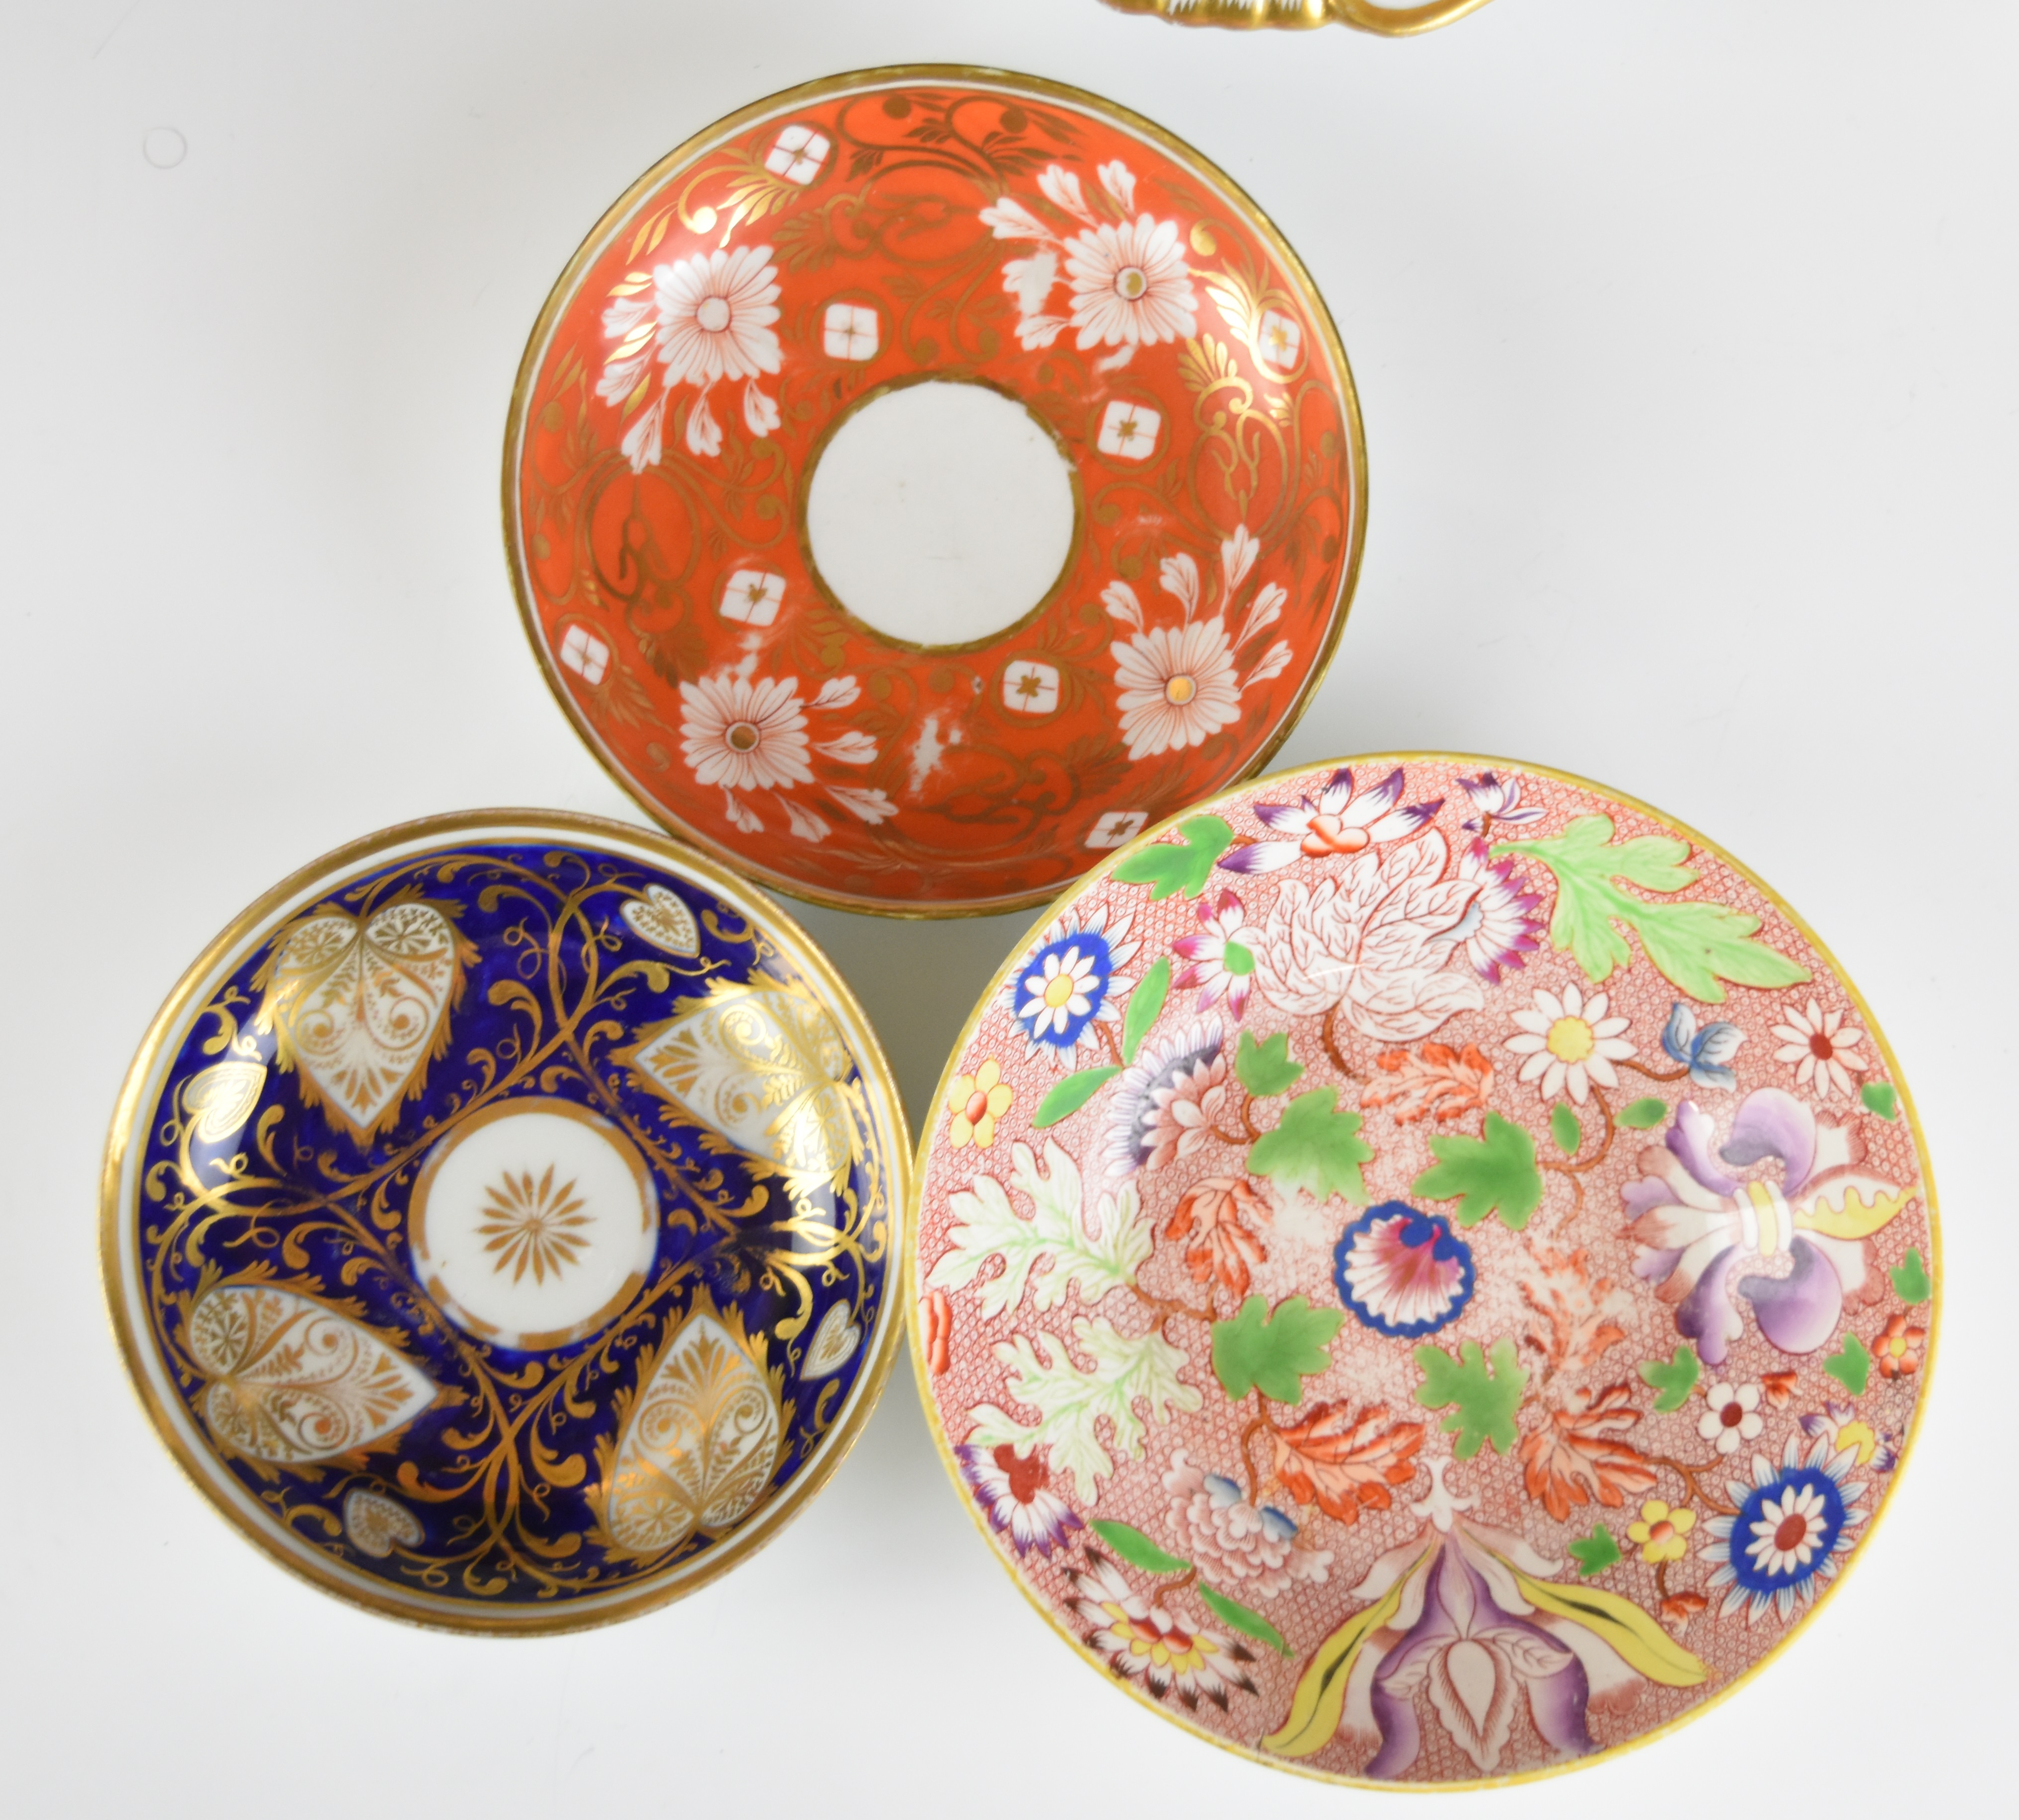 19thC porcelain saucers, dishes, coffee cans and cups including New Hall, Ridgway, bat print - Image 17 of 22